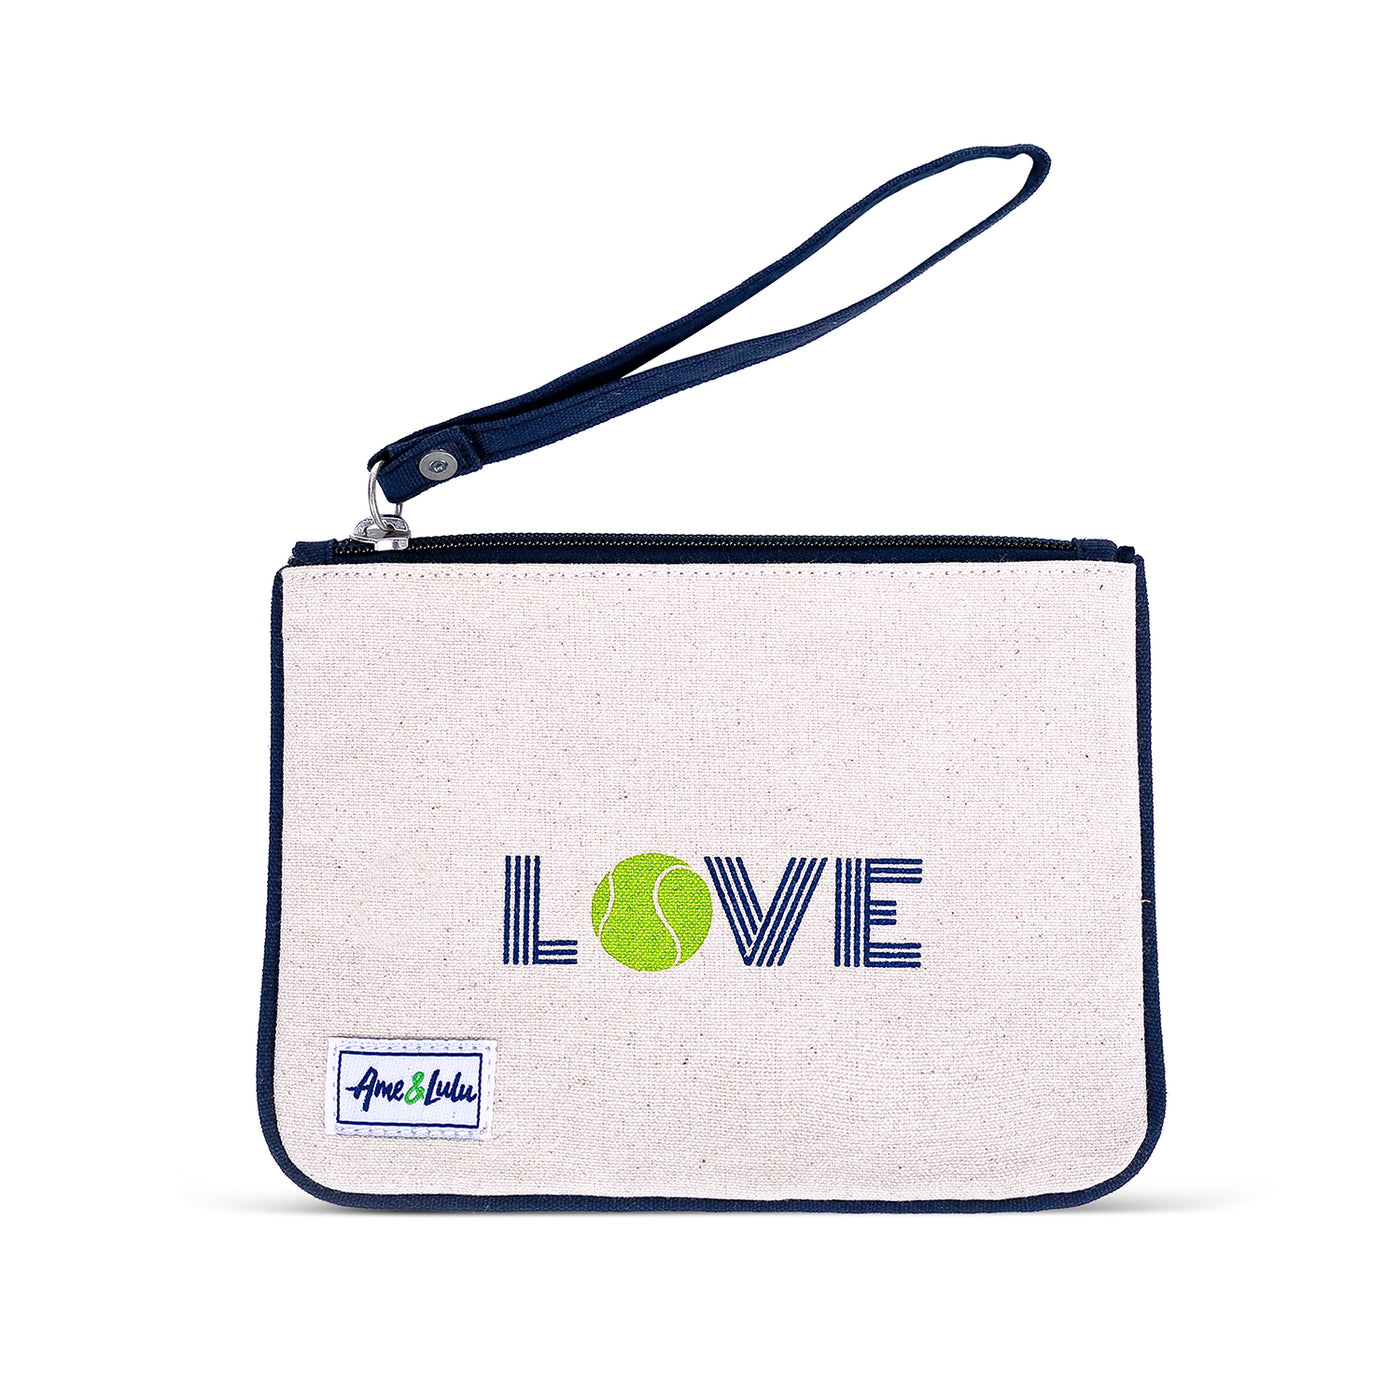 Small tan canvas wristlet with navy trim and strap. Front has the word "love" with a green tennis ball for the letter o